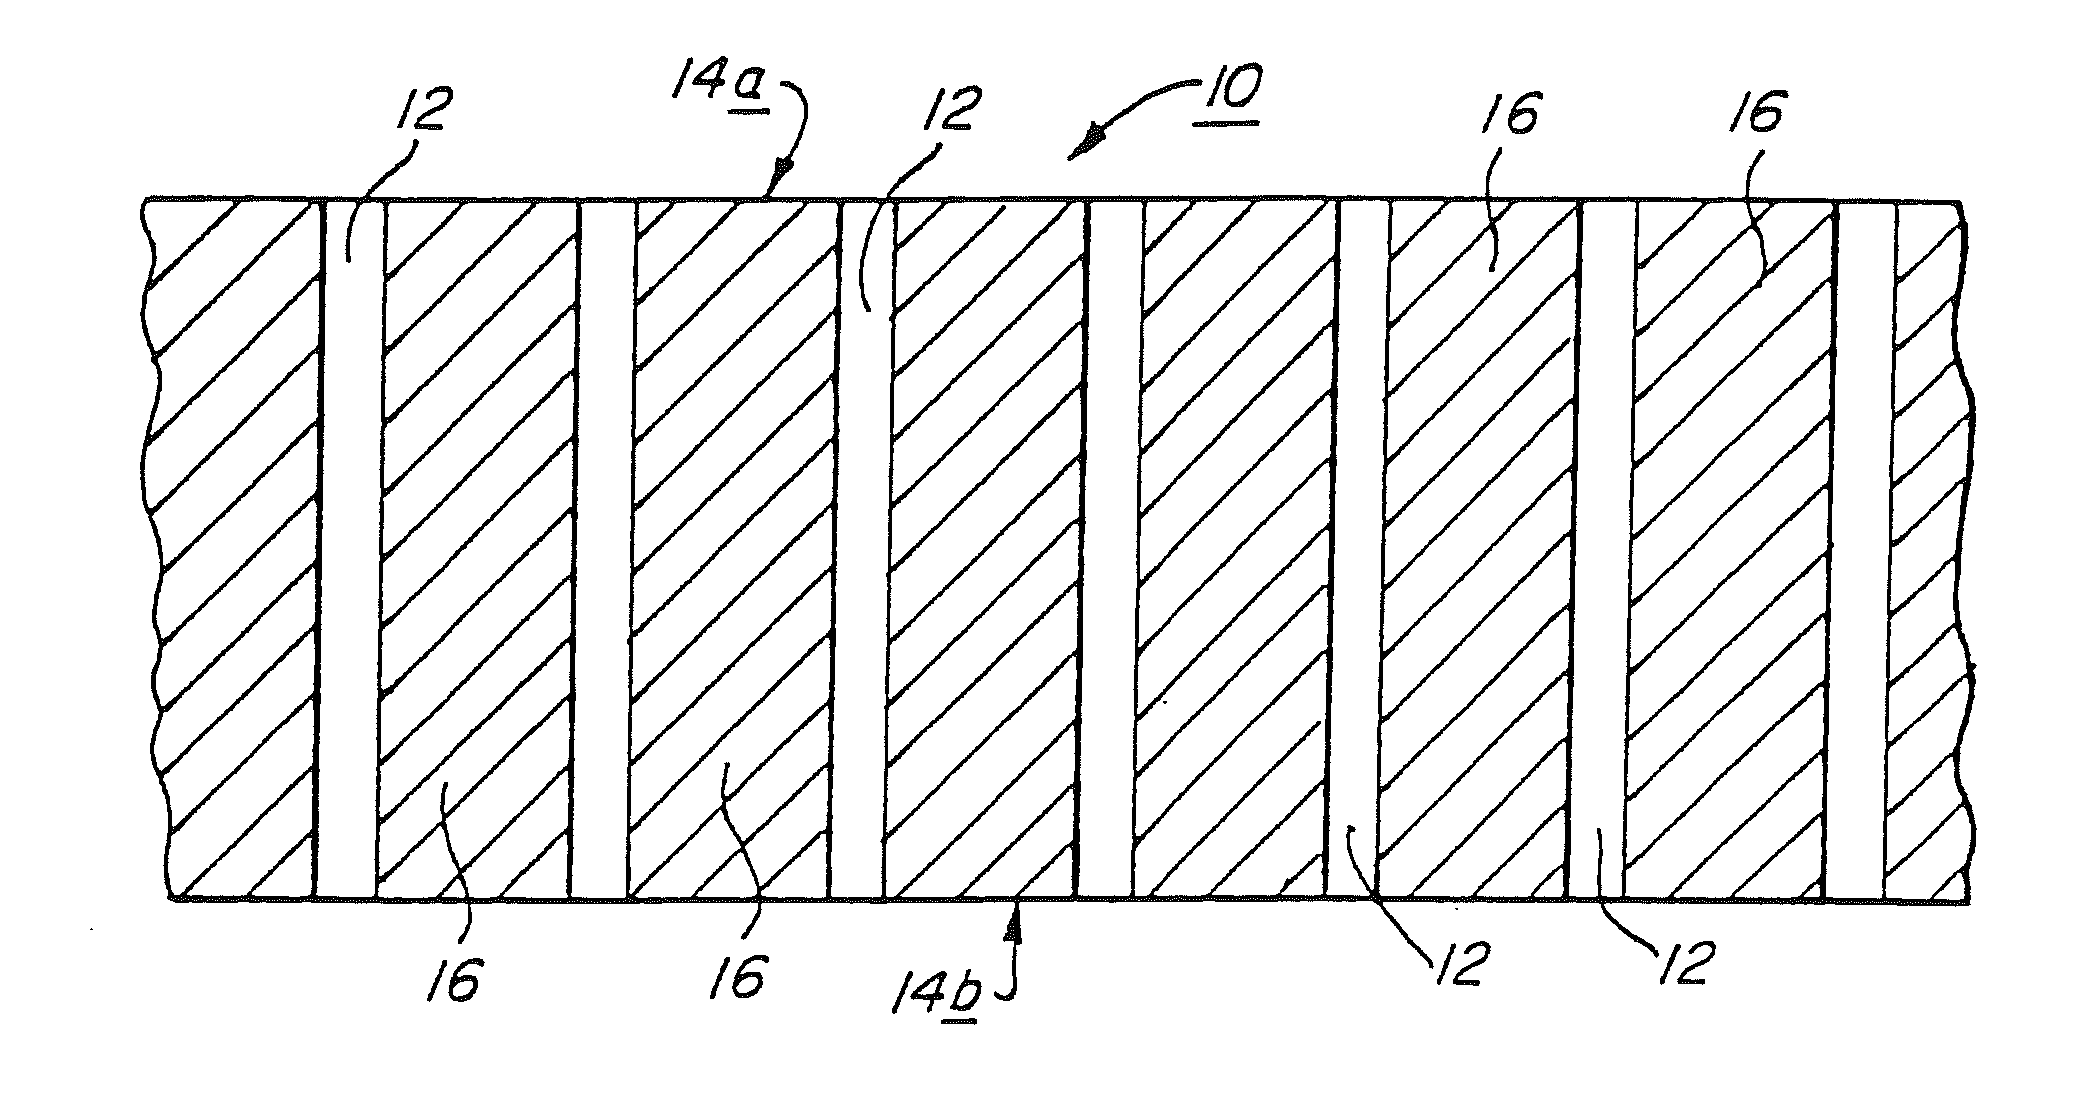 Detonating cord and methods of making and using the same